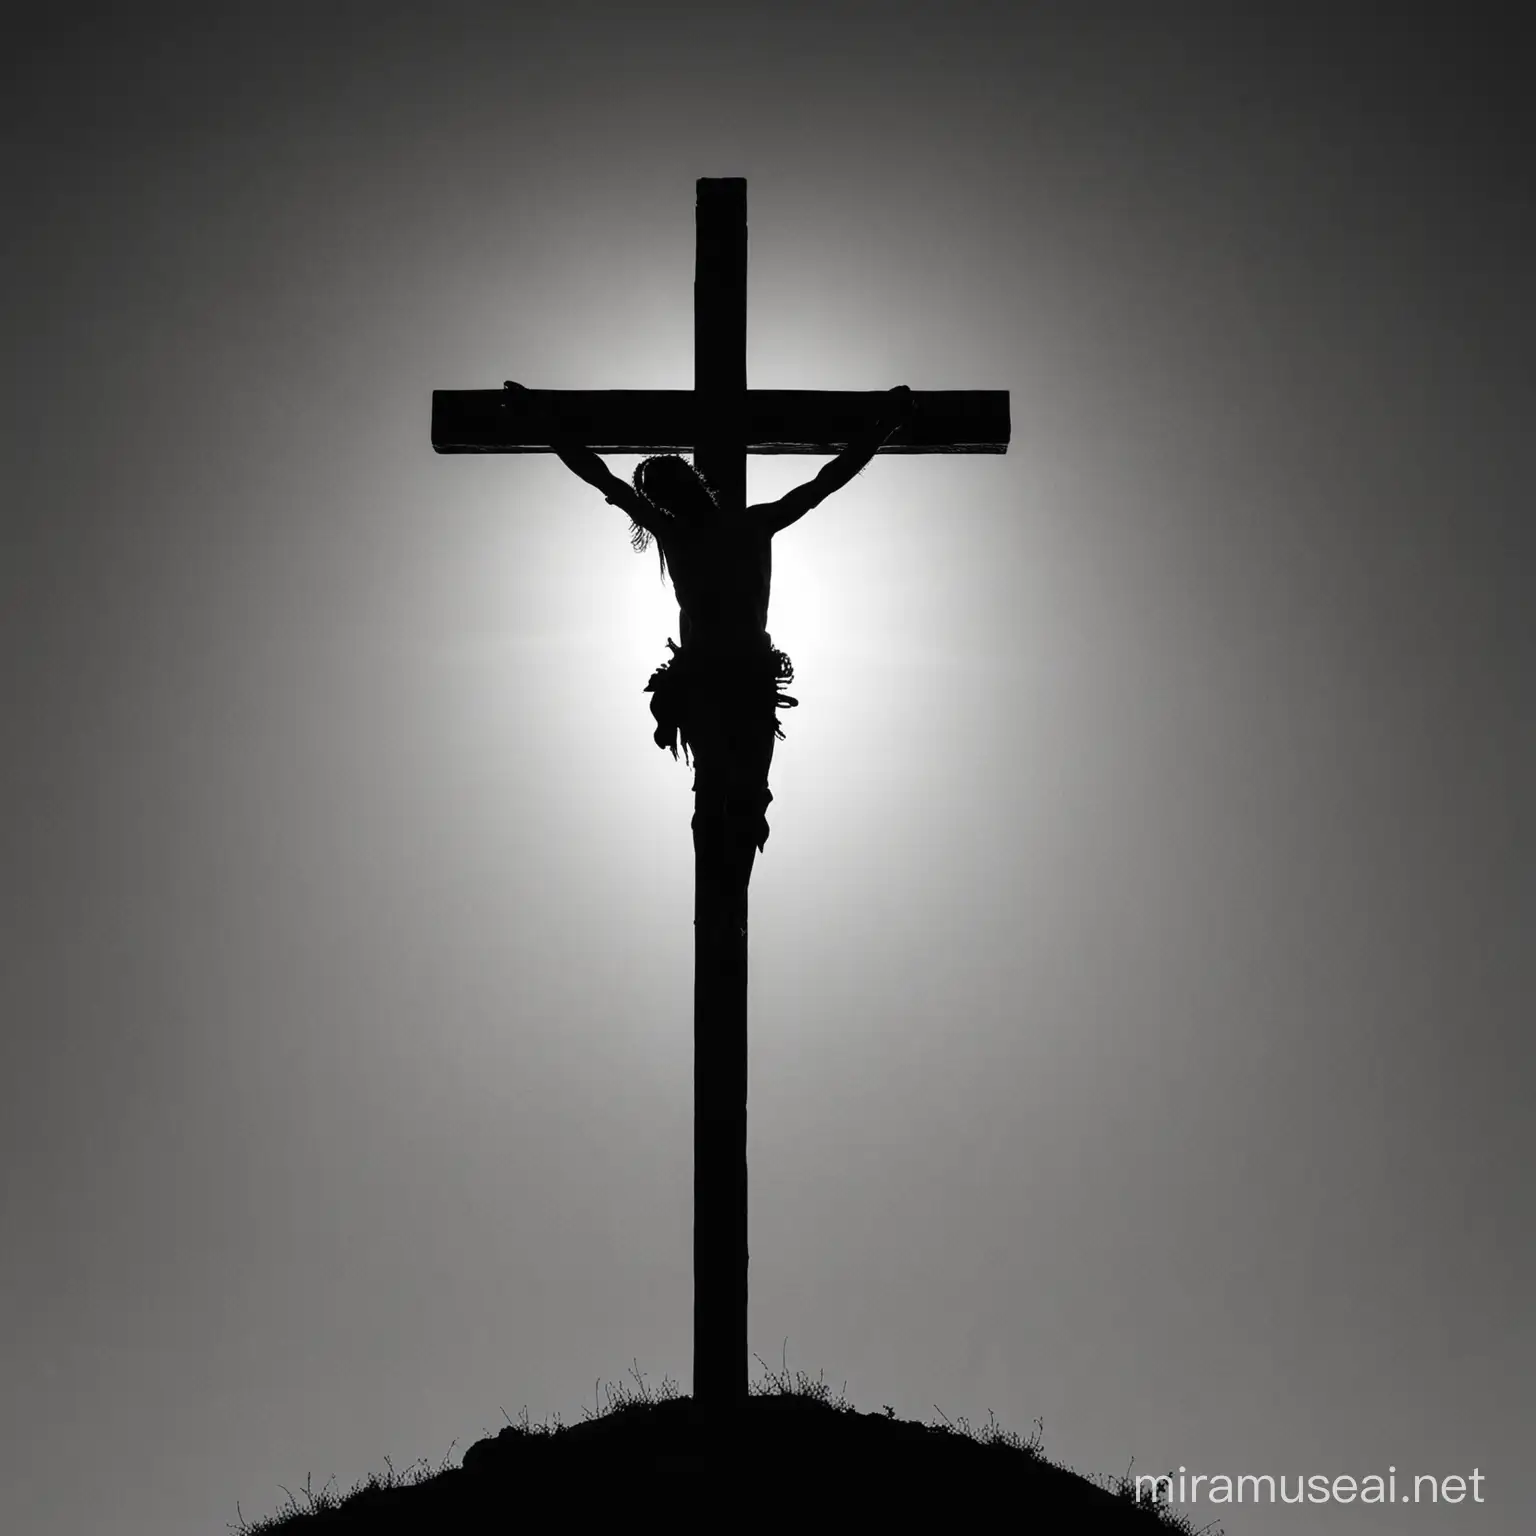 Silhouette of Jesus on Cross with Adjacent Crosses